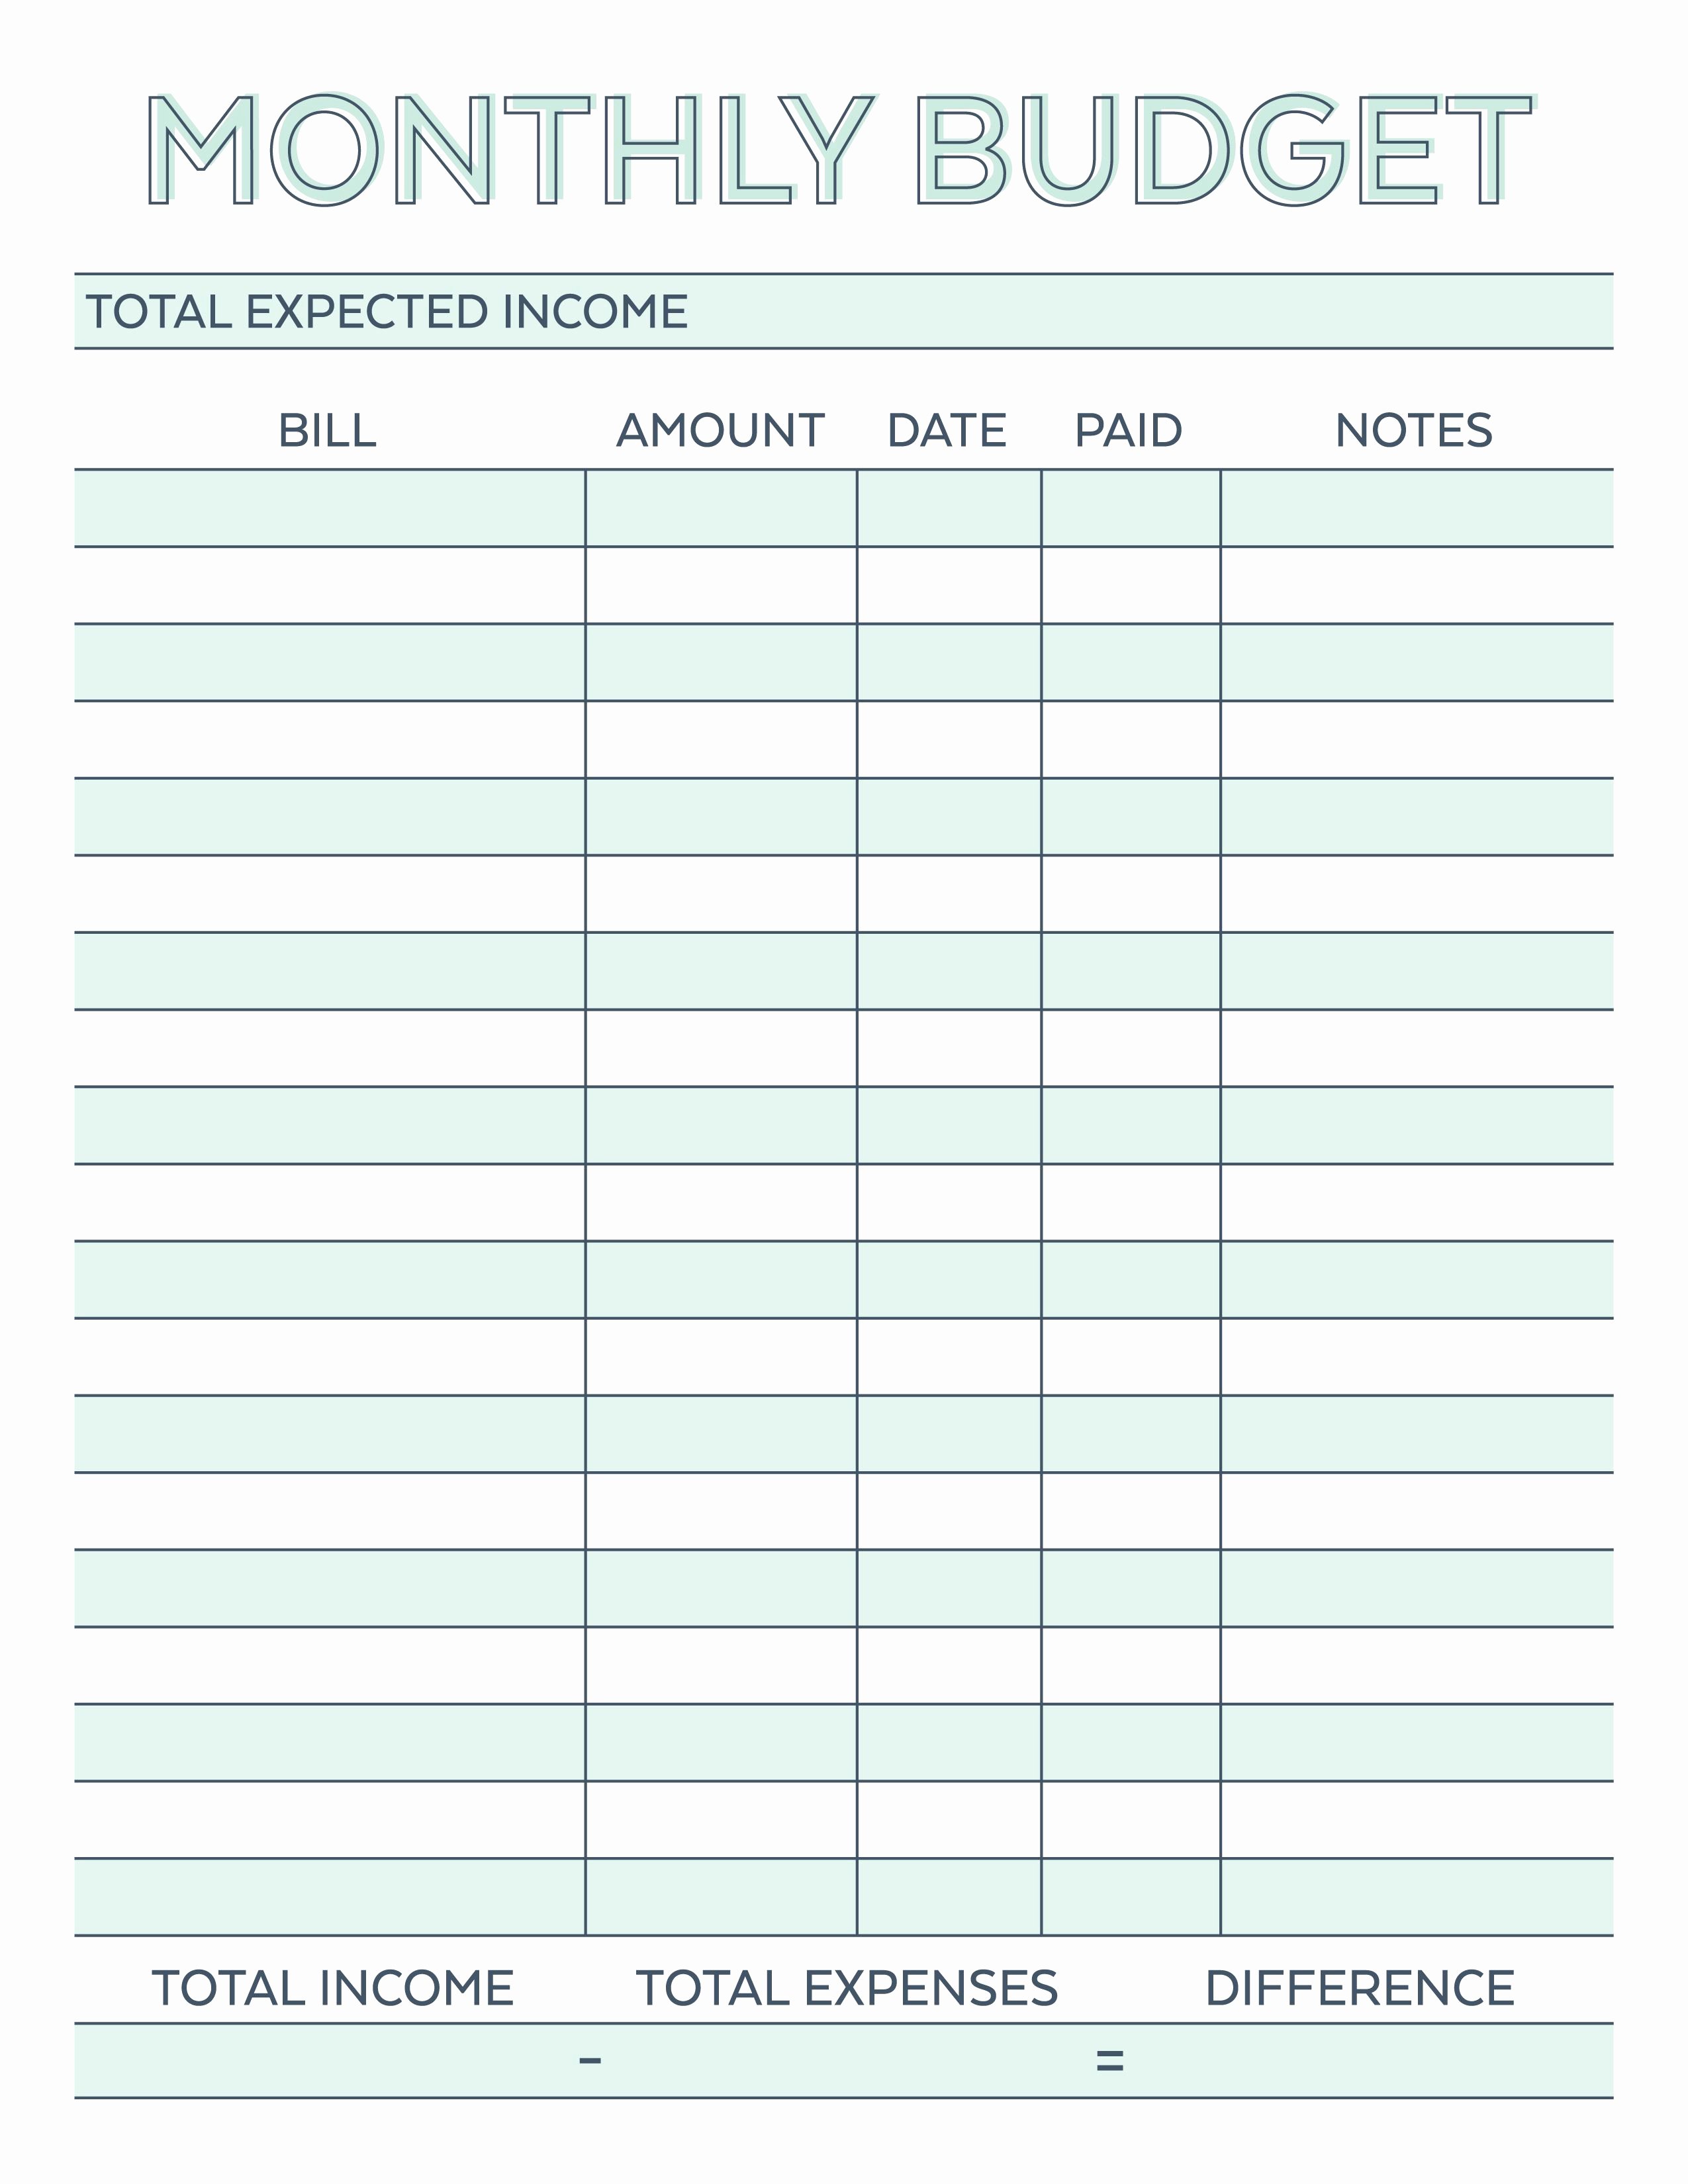 Monthly Budget Excel Template Lovely Pin by Melody Vliem On Printables